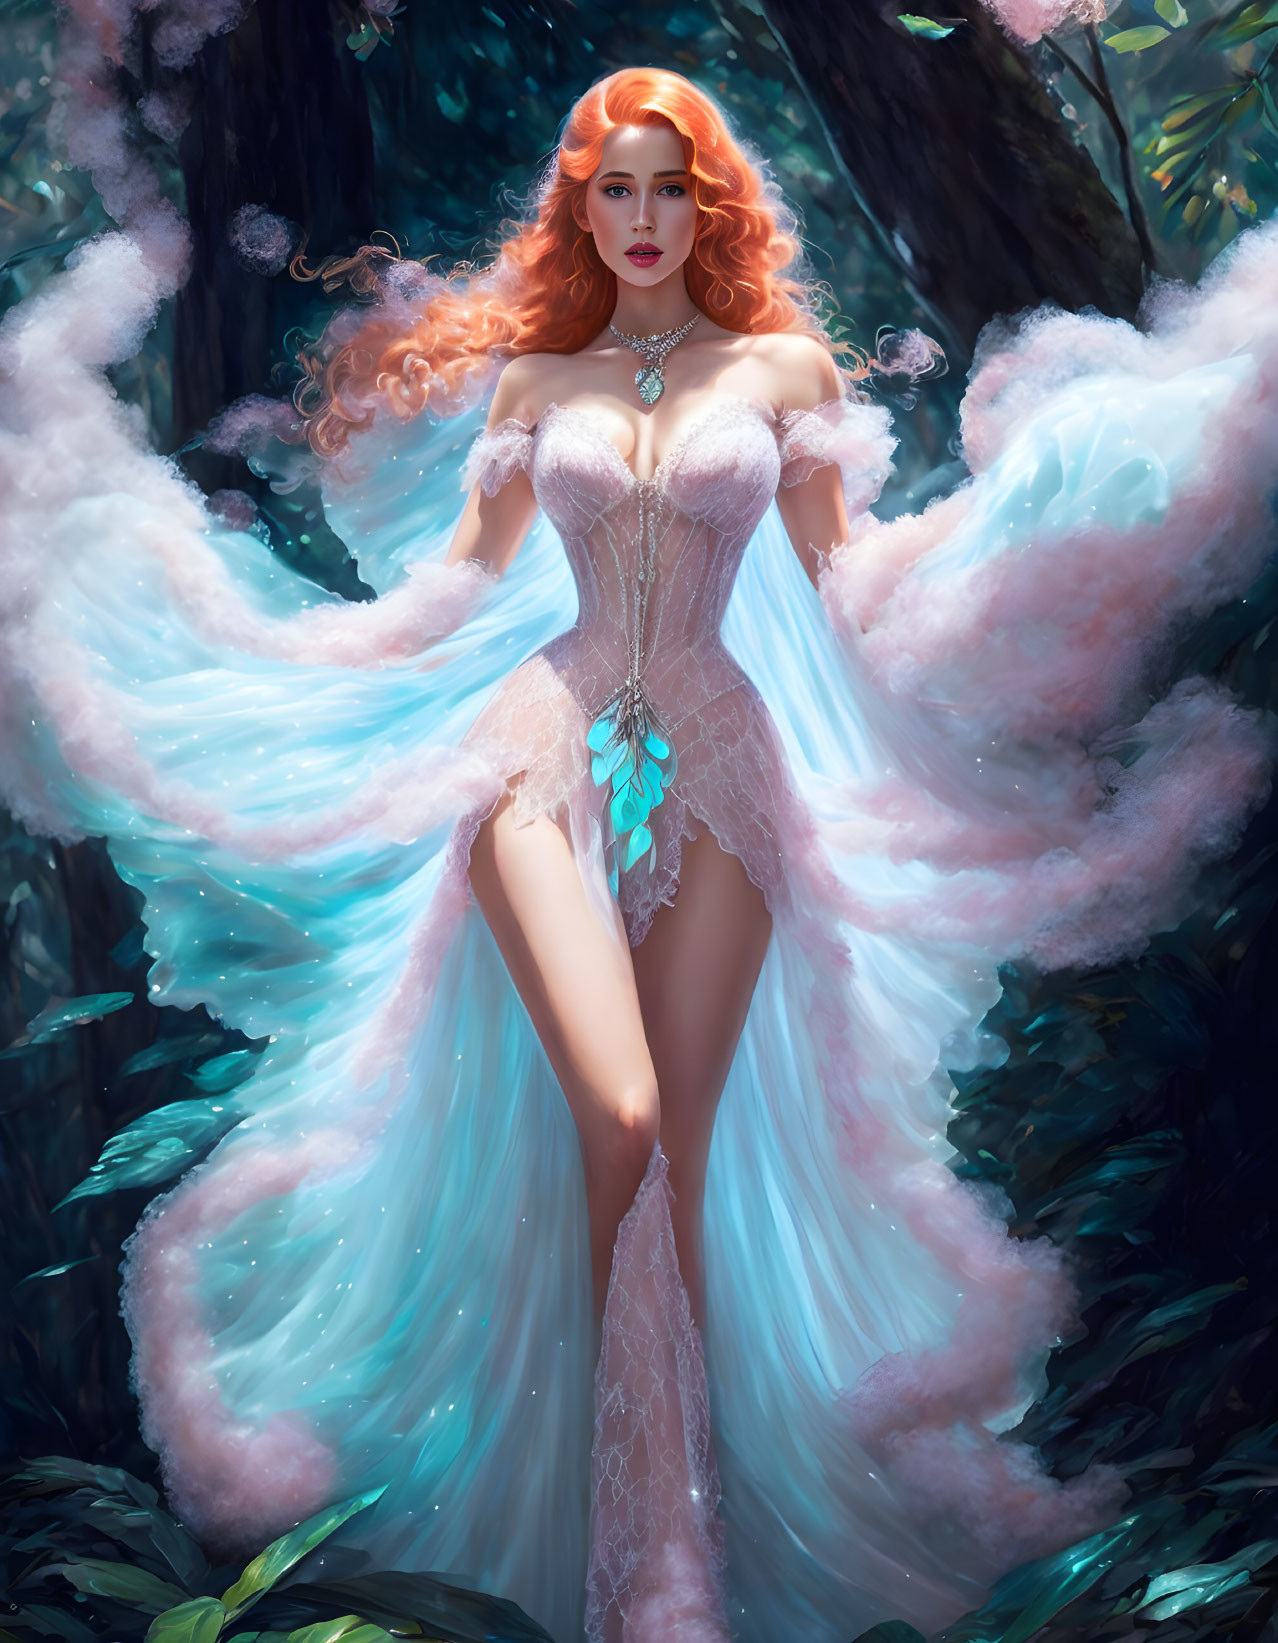 Digital Artwork: Red-Haired Woman in White Gown in Forest Setting